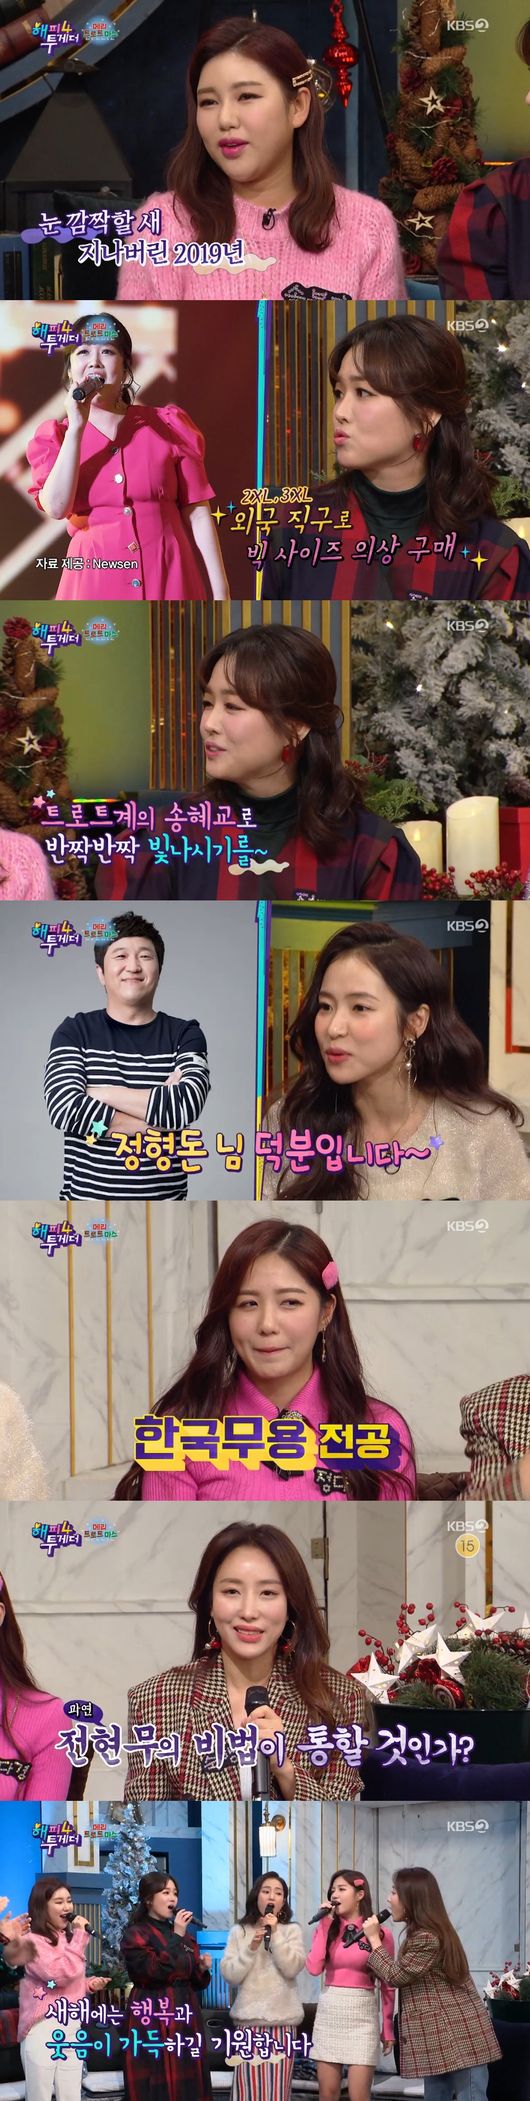 The excitement and dedication of Happy Together Trot actresses gave the best laugh.KBS 2TV Happy Together (hereinafter referred to as Hattoo 4), which was broadcast on the 26th, was featured in Mary Trotmas.This feature, which was full of Song Ga-in, The Miami, Hongja, Jung Da Kyung, and Sook-haeng, which painted Korea as a Trot craze in 2019, became the best gift for viewers at the end of the year.The ratings also responded to the appearance of Trot actresses armed with excitement and dedication.According to Nielsen Korea, a ratings agency on December 27, the ratings of the broadcasts rose significantly from the previous broadcast, recording 5.5% of the nationwide ratings (1 parts) and 6.6% (2 parts).By metropolitan area, it recorded as much as 7.1% (part 2), proving that they are ratings fairy.Song Ga-in, who recently beat Feng in a vote and became the best hot star in 2019, said, I live and live and this day comes, it is still a dream.He also proved to be the best star of the year, referring to popular culture and arts awards, concert sales, and awards ceremony performances.His anecdote, which values the unity of the party, created a new character called Songdae, but in addition to this, he was impressed by the way he took a younger generation than anyone else.I did not even fit 2XL, 3XL, but now I have lost a size 66, said The Miami, who appeared to be out of weight.When another cast member found Song Hye-kyos face in the weightless Song Ga-in, he first denied it, saying, I actually heard such a story from a young age.Hongja, who says the year of reincarnation this year, said he lost his real name Park Ji-min at home and said, My mother also calls me Hongja ~ and laughed.Now, the name Hongja, which is more like a real name than his real name, is the name born thanks to Jung Hyung Don. I want to buy you a meal.The Korean dance version of Mamma, which boasts a beautiful dance line, and the parade of the trot-based Cy Young-heung-saeng-saeng parade also focused attention.In addition, Jung Dae-kyung introduced the way to be a drink at the end of the year, and all of them burst into bread, and the song of Beyonce was reinterpreted as Trot, saying that any song can be trotted.FLEX, a Trot actress due to her income that changed this year, also attracted attention.From Song Ga-in, who added the apartment prices of his own brothers, to The Miami, the first luxury shopping, to Hongja, whose income increased 20 times.The story of those who are having a rich year-end with the love of their fans was surprising.In addition, the lecture of the seniors toward the trot-based super-class newcomer, the legacy, was a laughing point.It is a one-point lesson for strong control, vibration, stage manners, etc., and upgraded the heritage chain further.In addition, Song Ga-in proposed a duet with Yun Song and said, The profit is 5 to 5, and the song is more.As Trot Avengers gathered, they could not miss the song Gift, and they sang their own life songs with their stories, and they were moistened with emotion on Thursday night of viewers.Finally, their carols unfolded, giving them magical happiness on the last Thursday night in 2019.KBS 2TV Happy Together broadcast capture